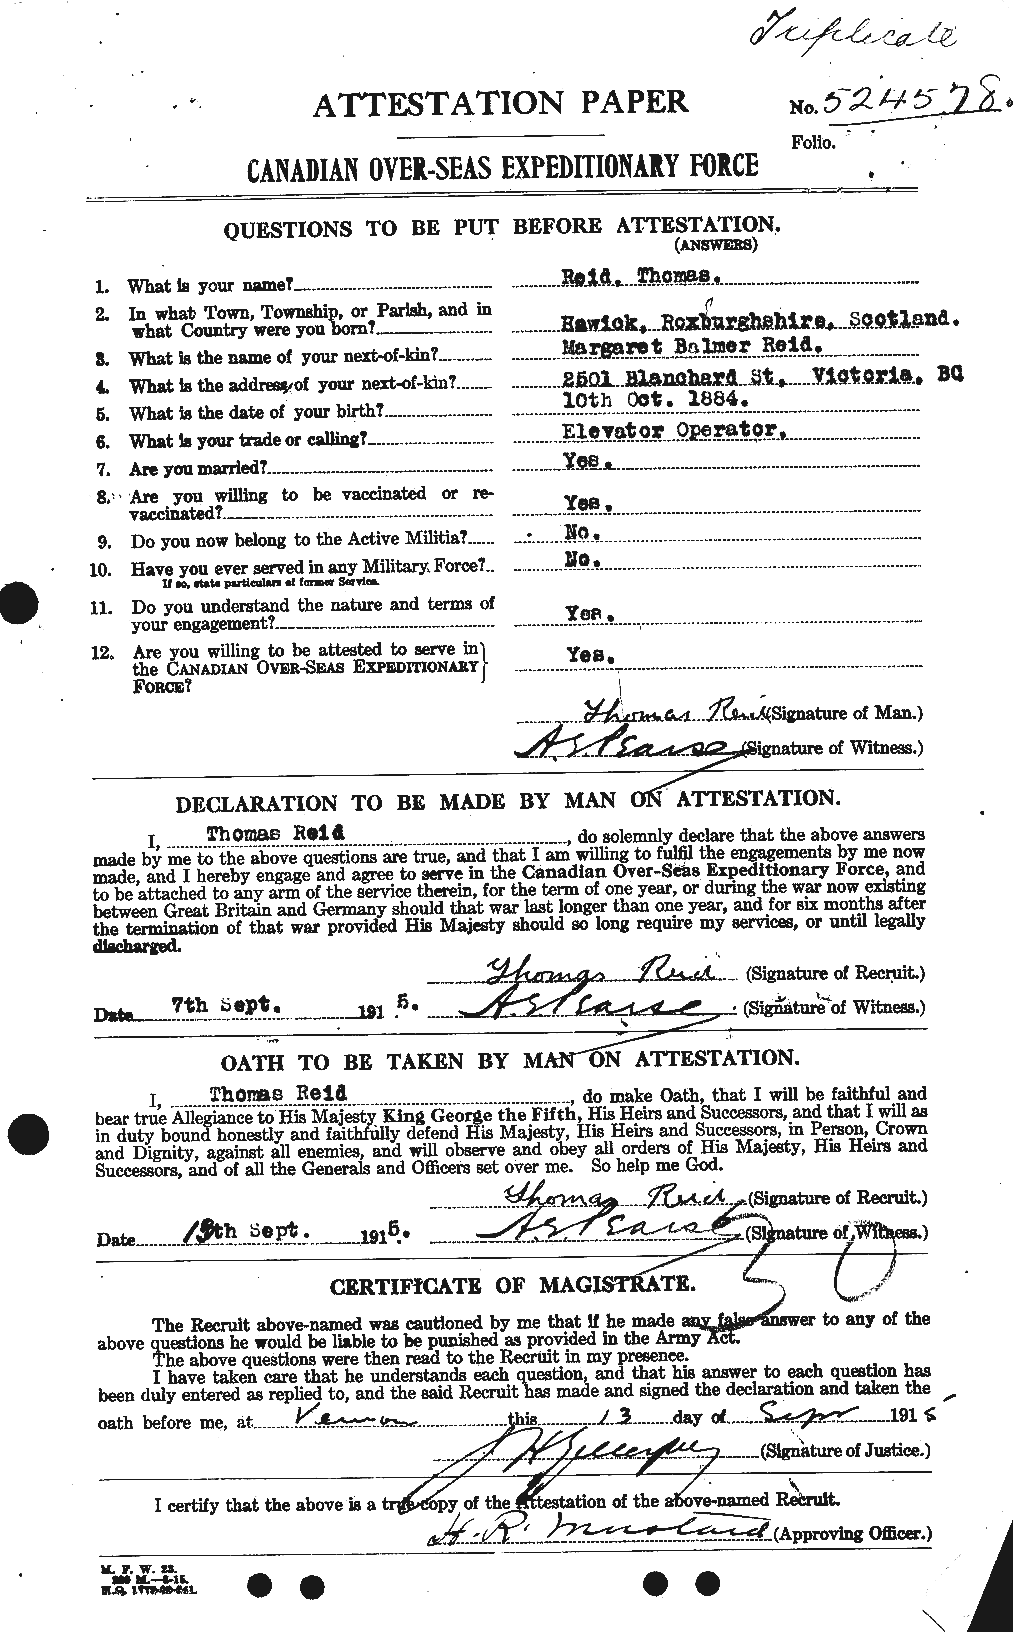 Personnel Records of the First World War - CEF 601976a